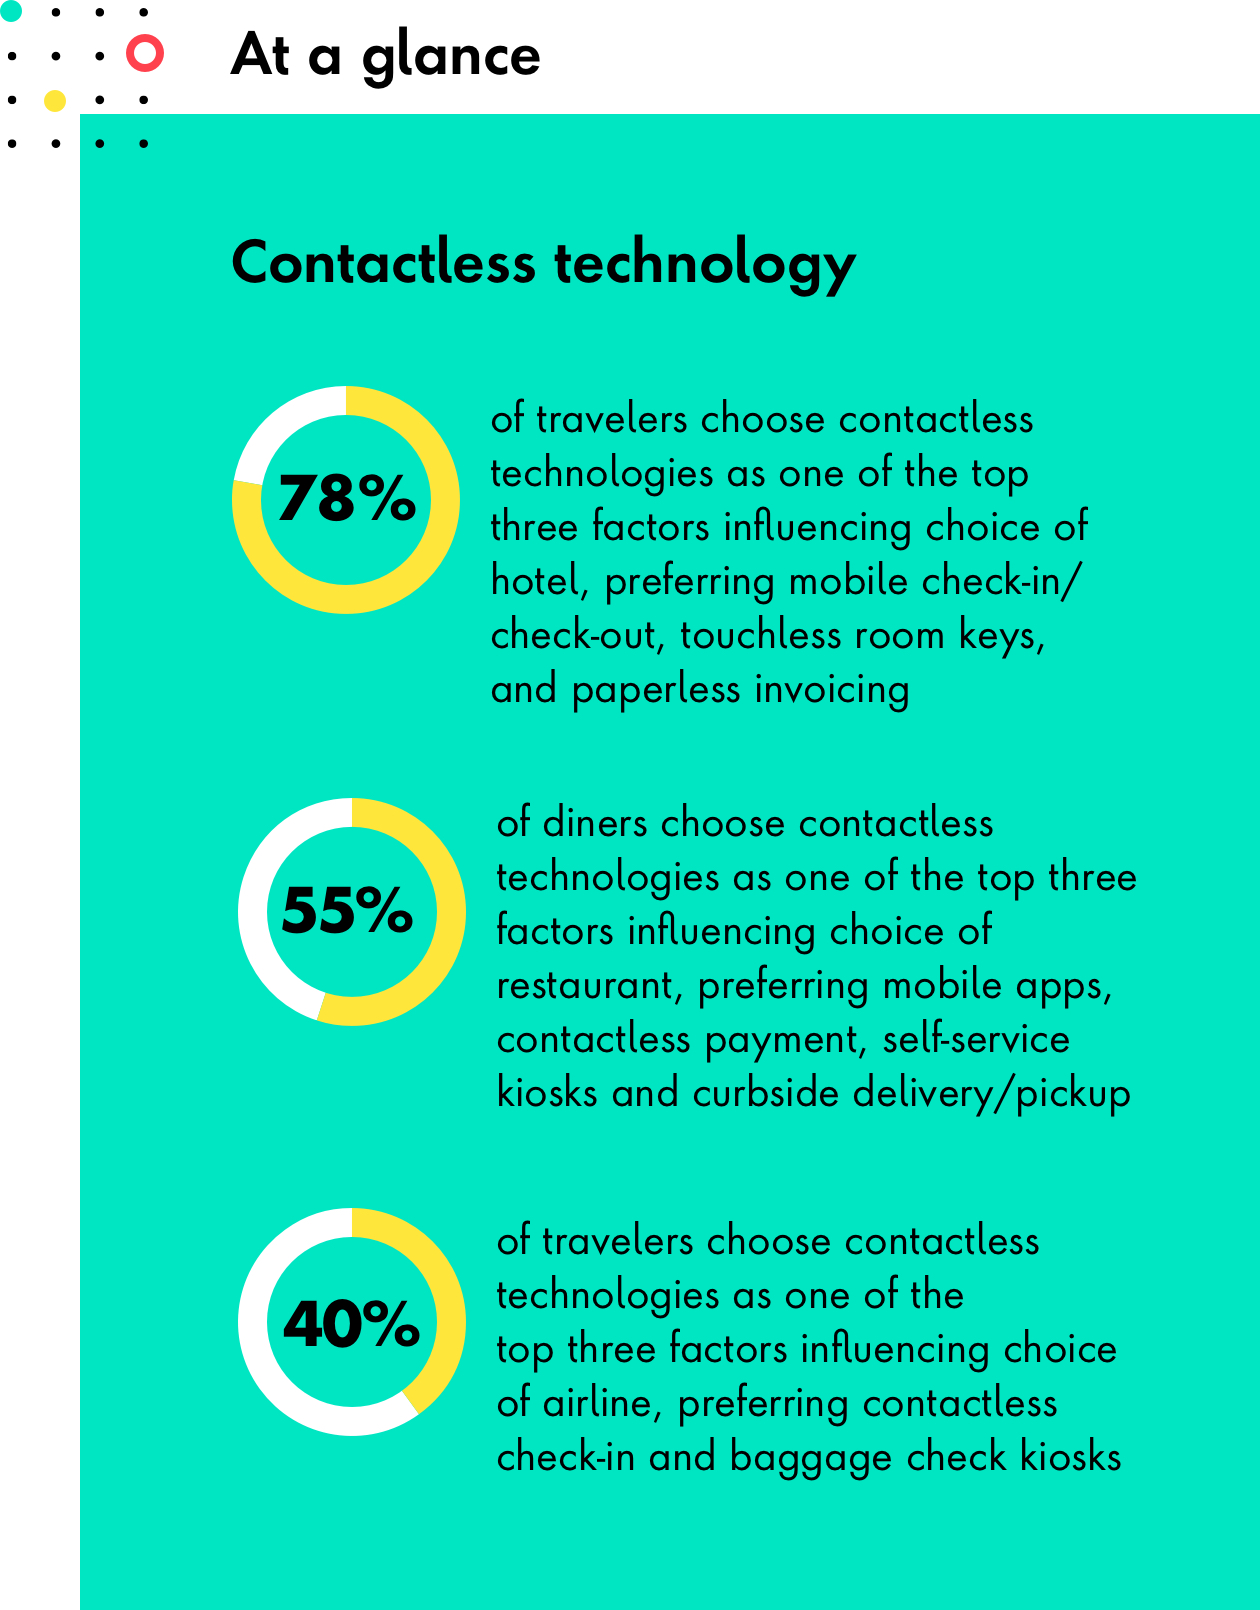 78% of travelers choose contactless technologies as one of the top three factors influencing choice of hotel, perferring mobile check-ins/check-out, touchless room keys, and paperless invoicing